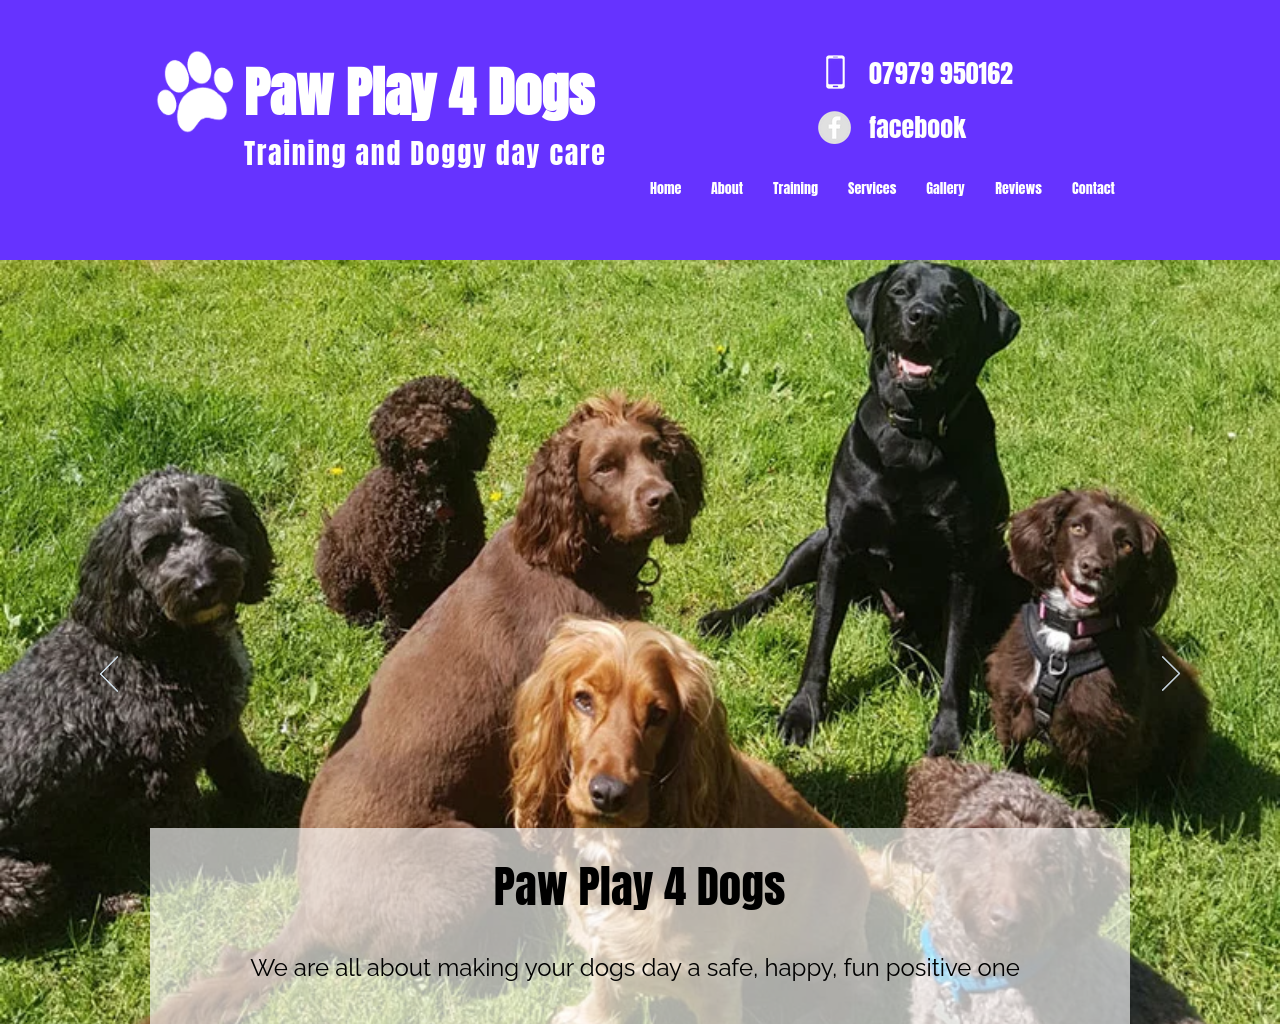 pawplay4dogs.co.uk